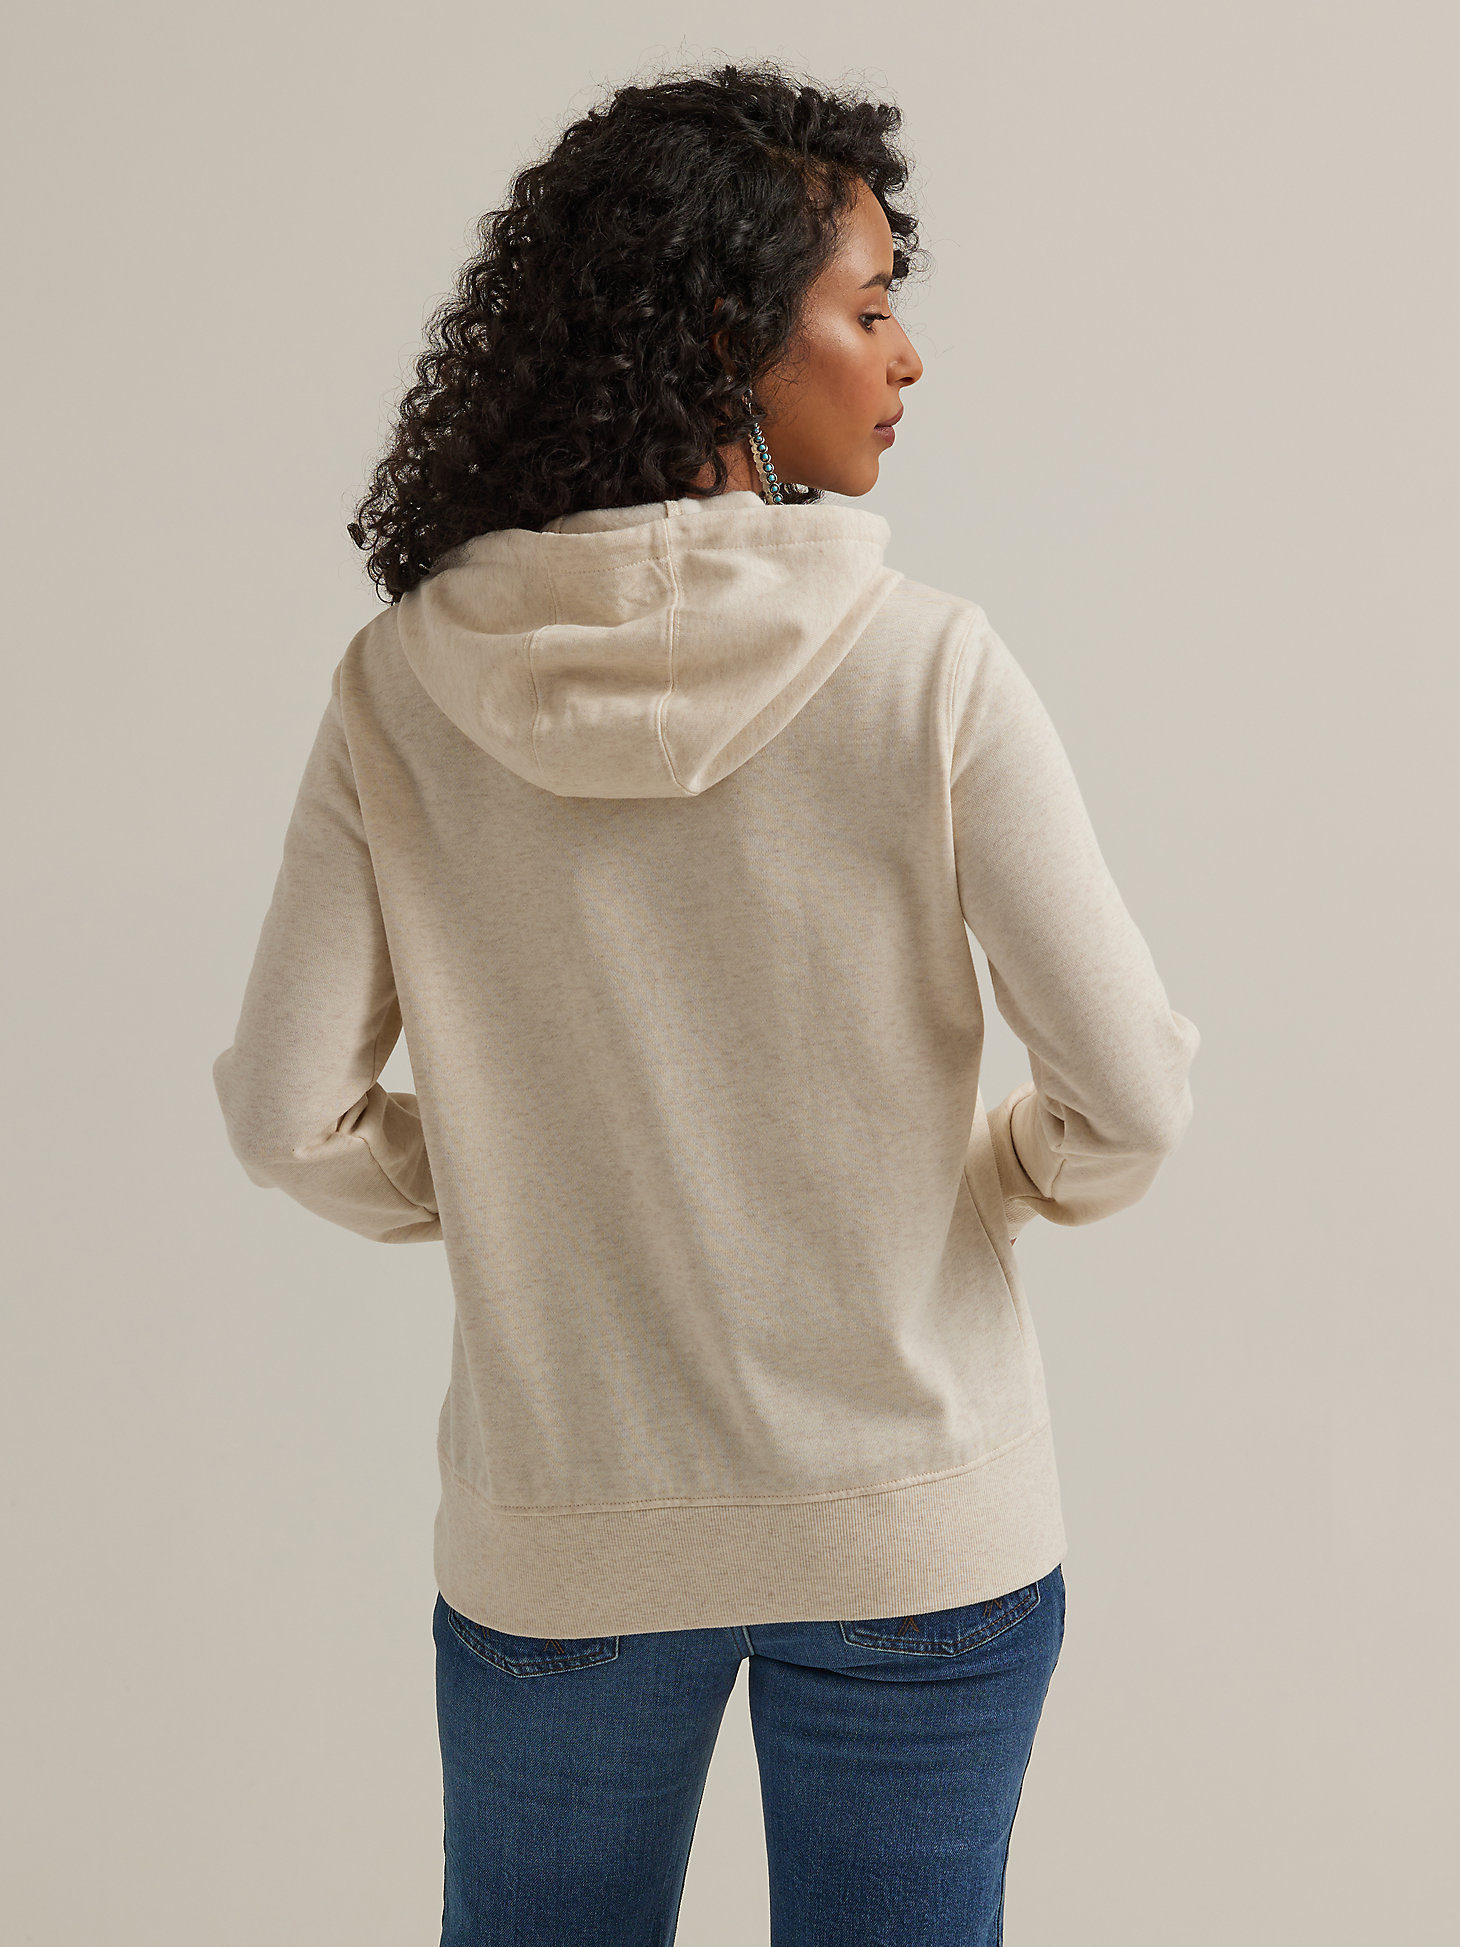 Women's Wrangler® Cowgirl Western Pullover Hoodie in Oatmeal Heather alternative view 1